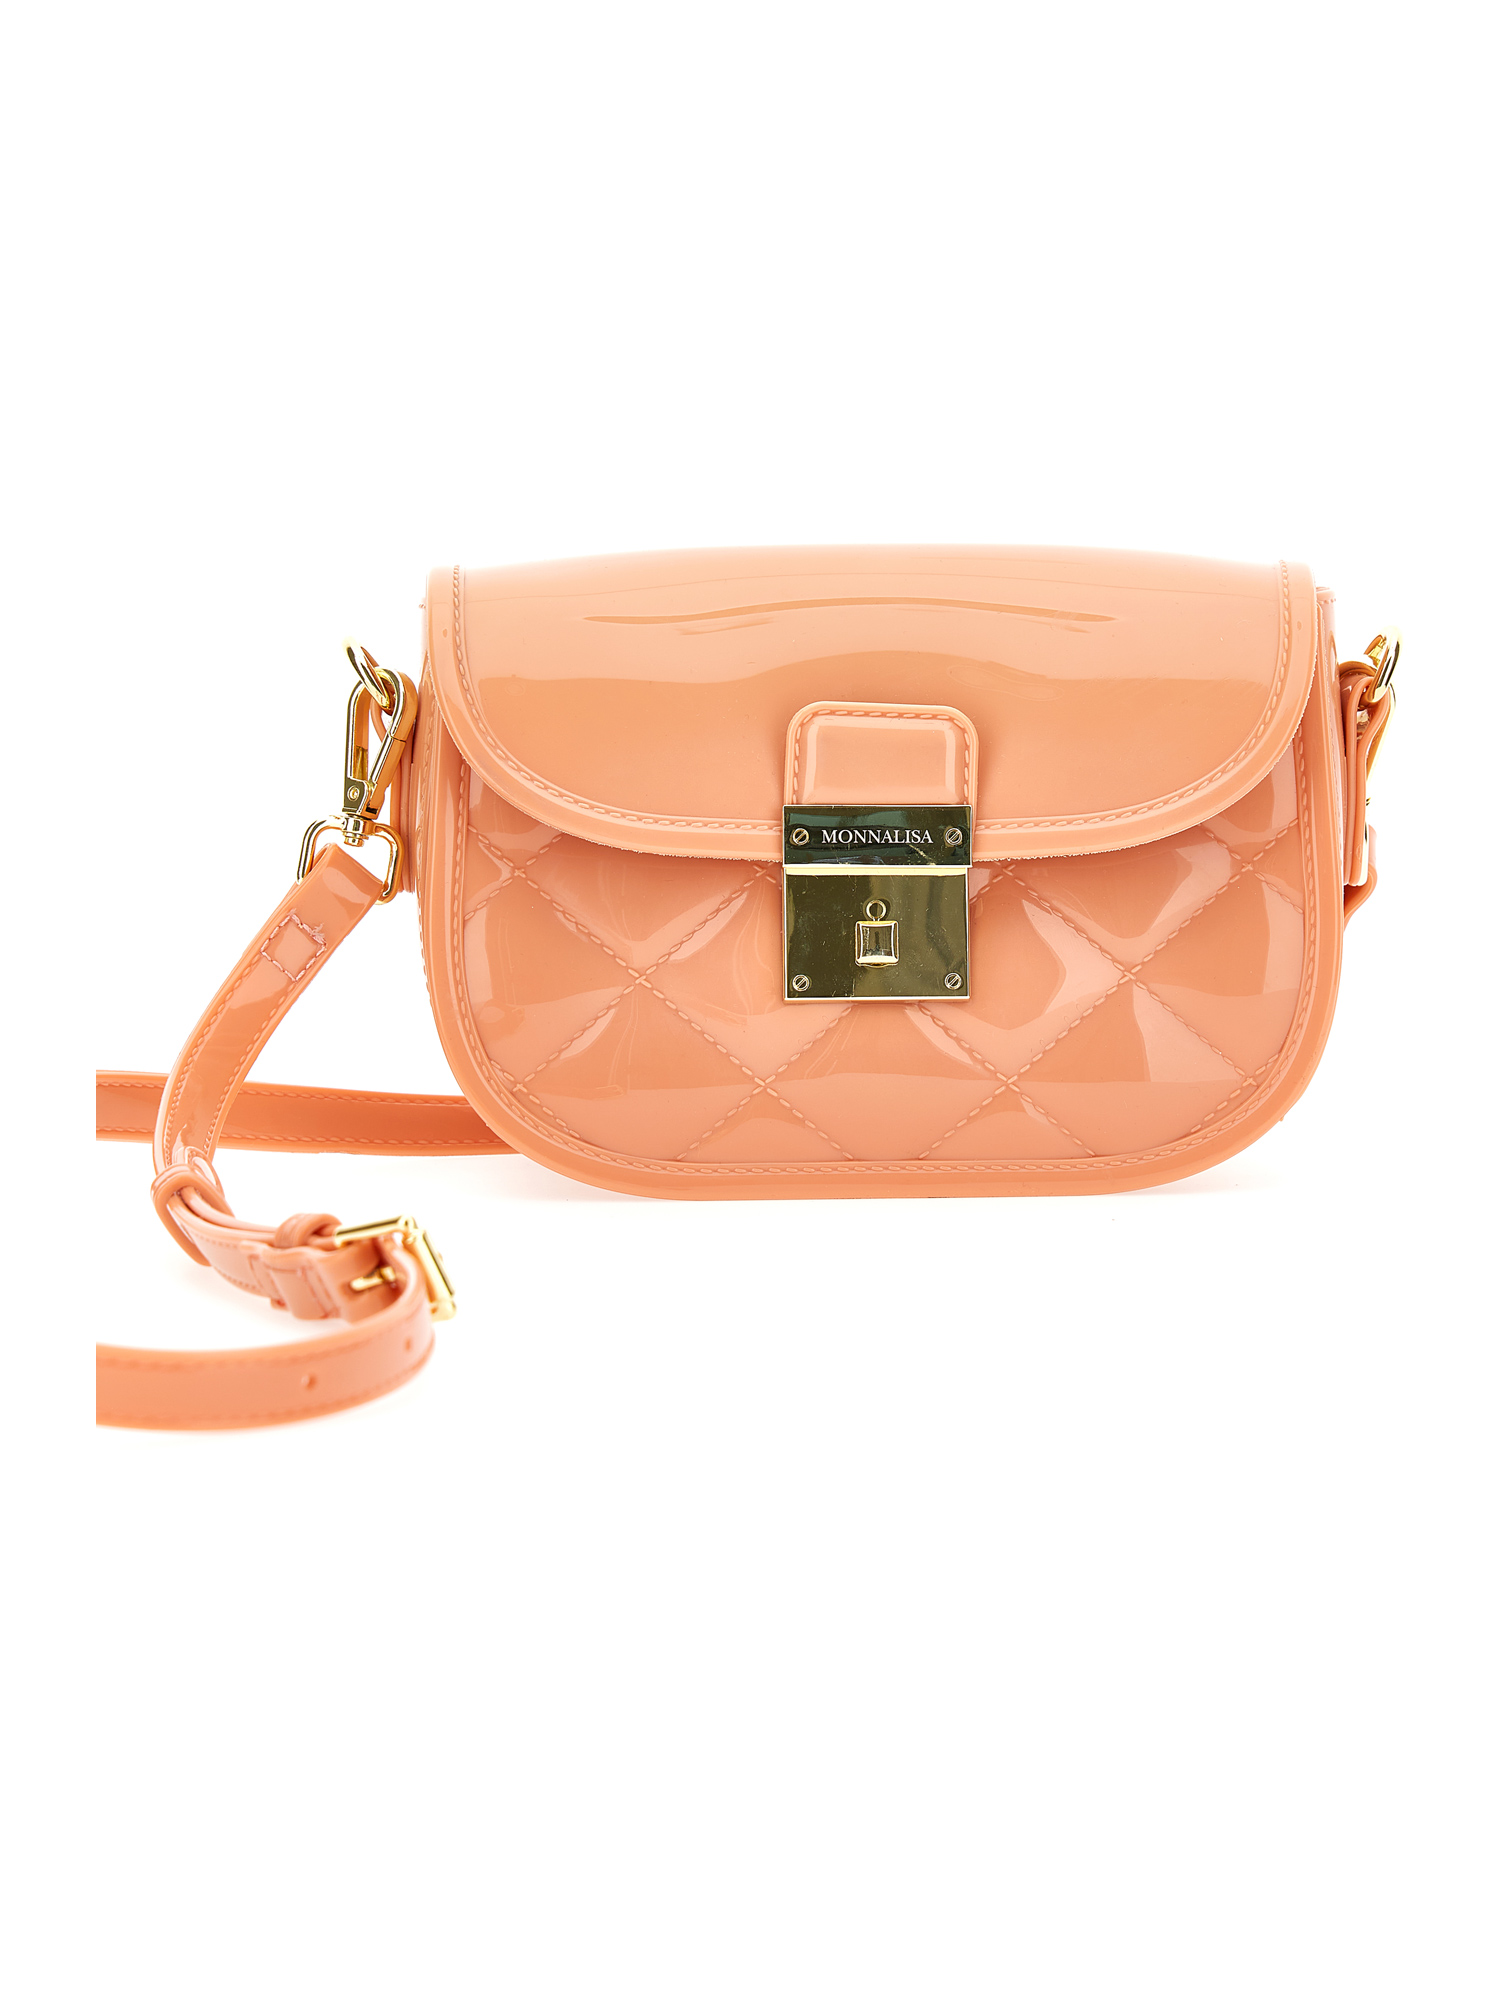 Monnalisa Pvc Bag With Shoulder Strap In Dusty Pink Rose